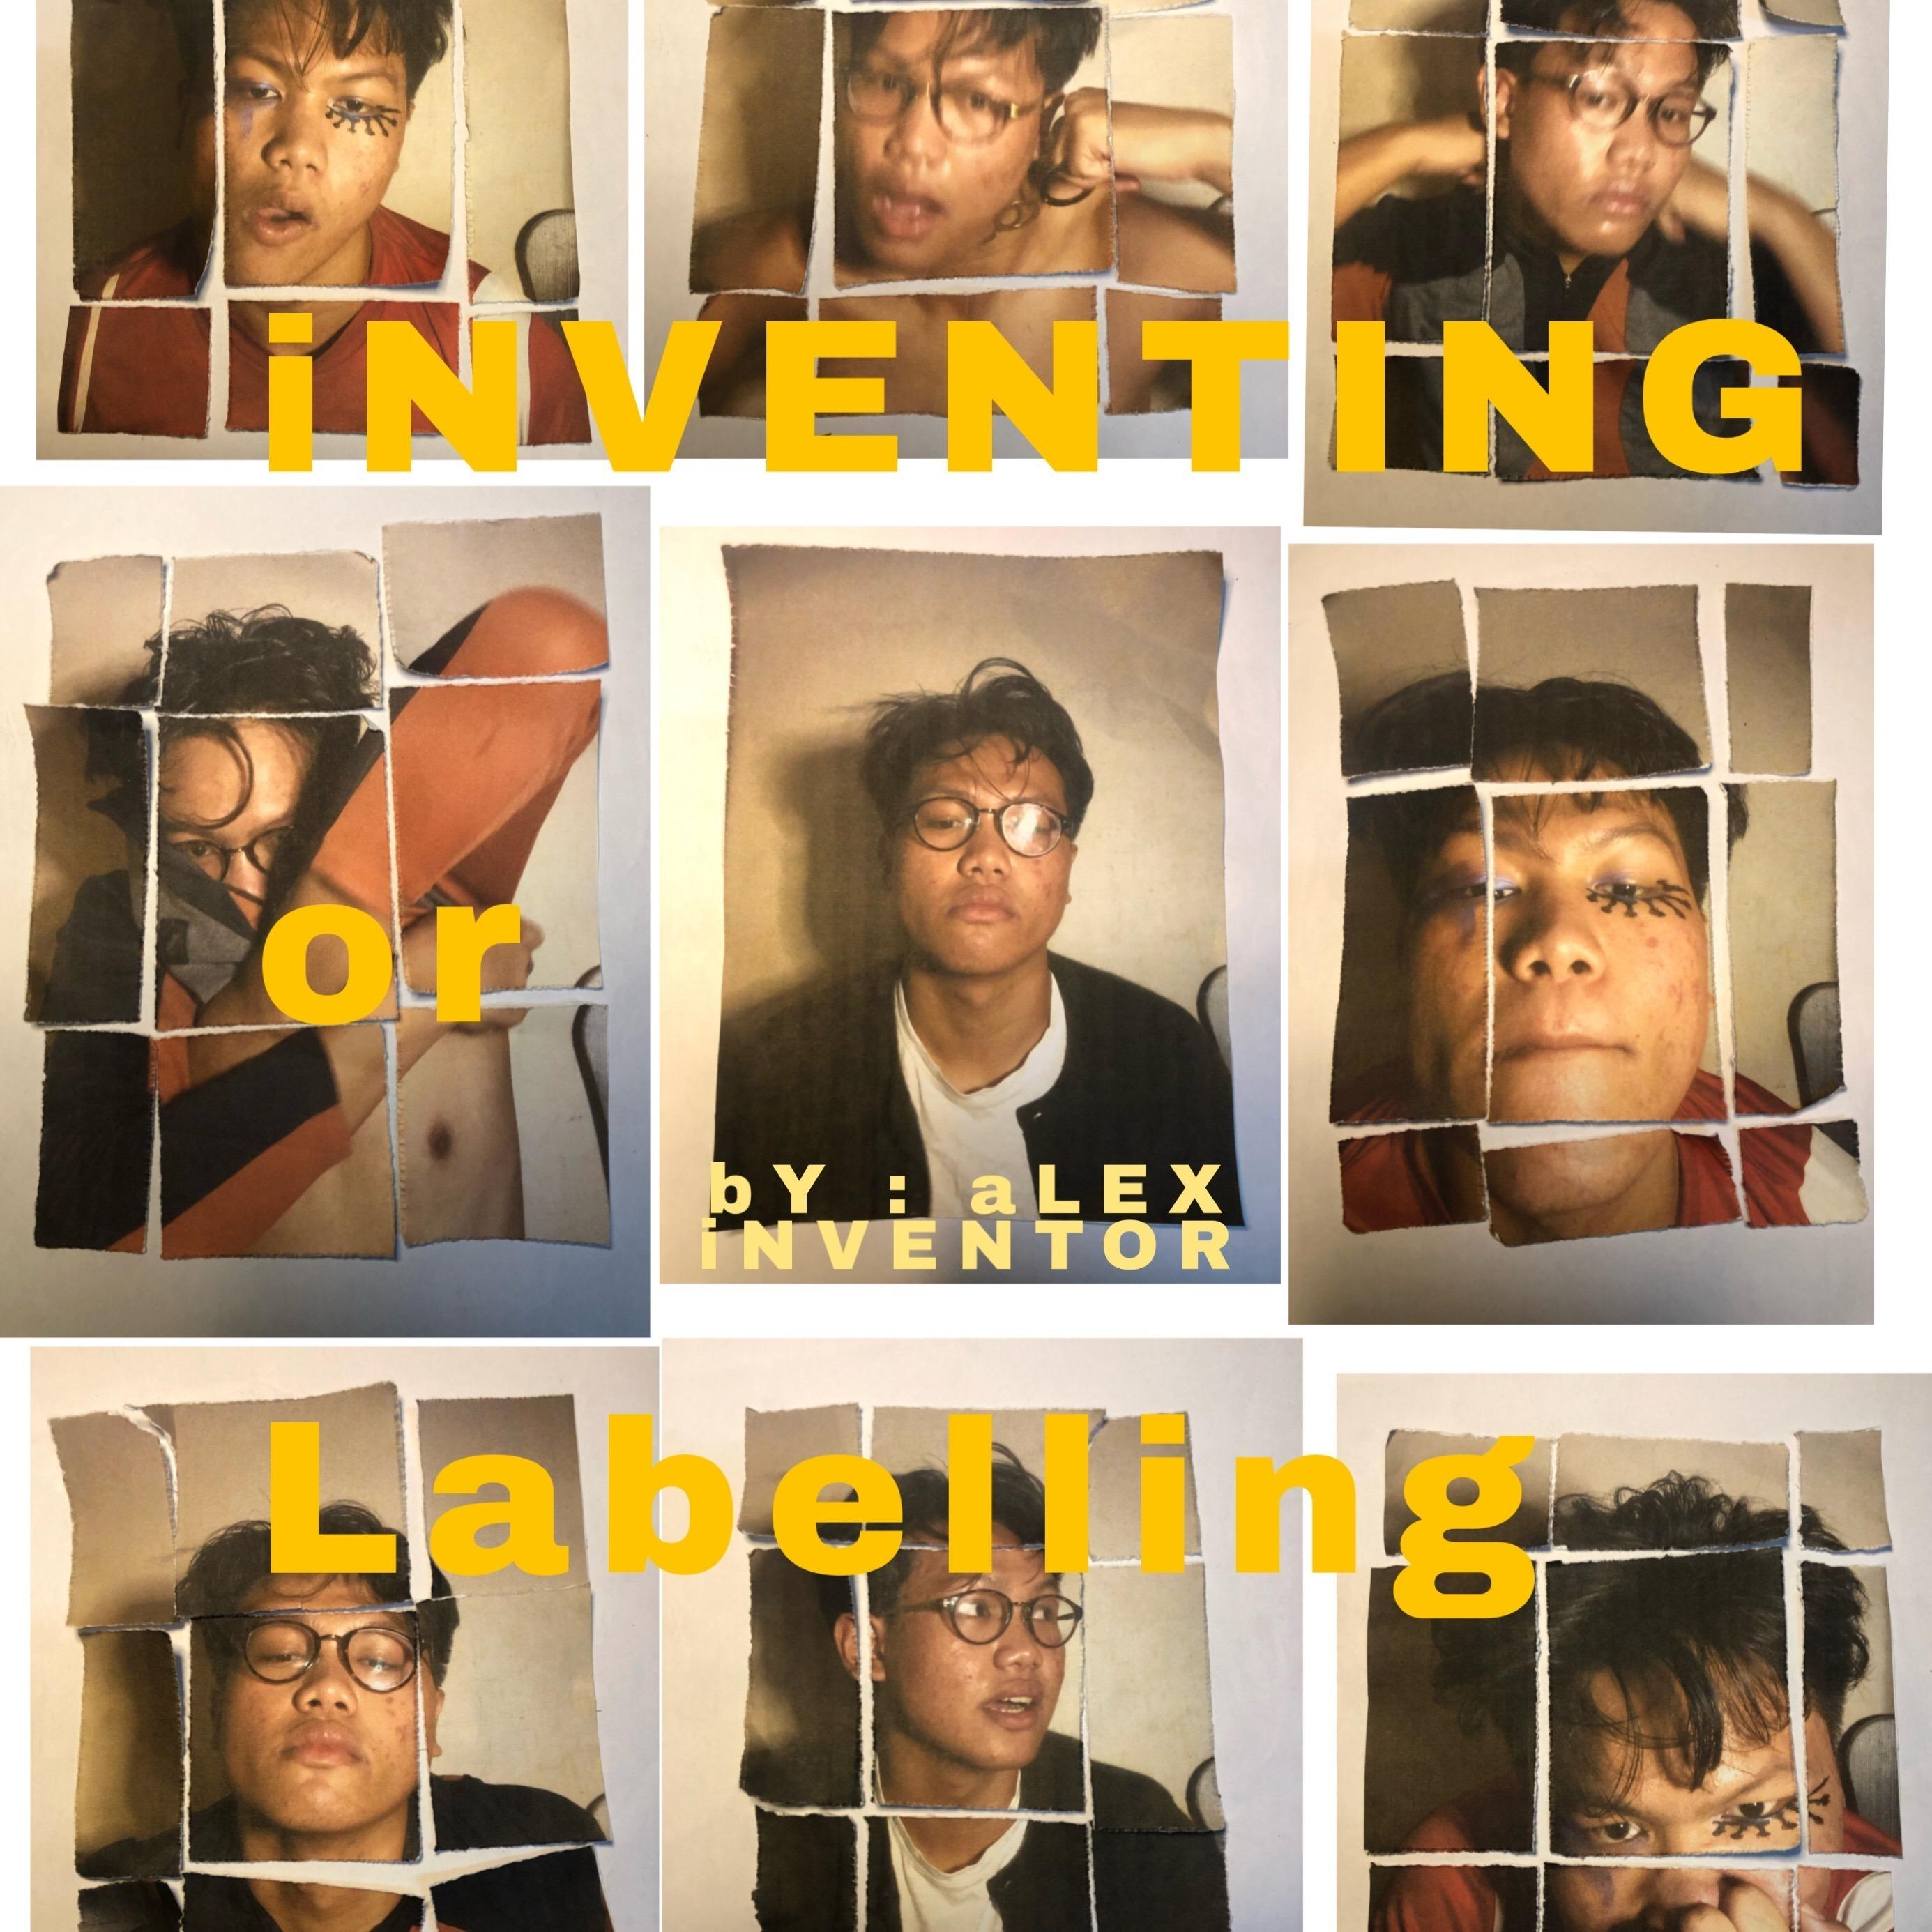 iNVENTING or Labelling with aLEX iNVENTOR